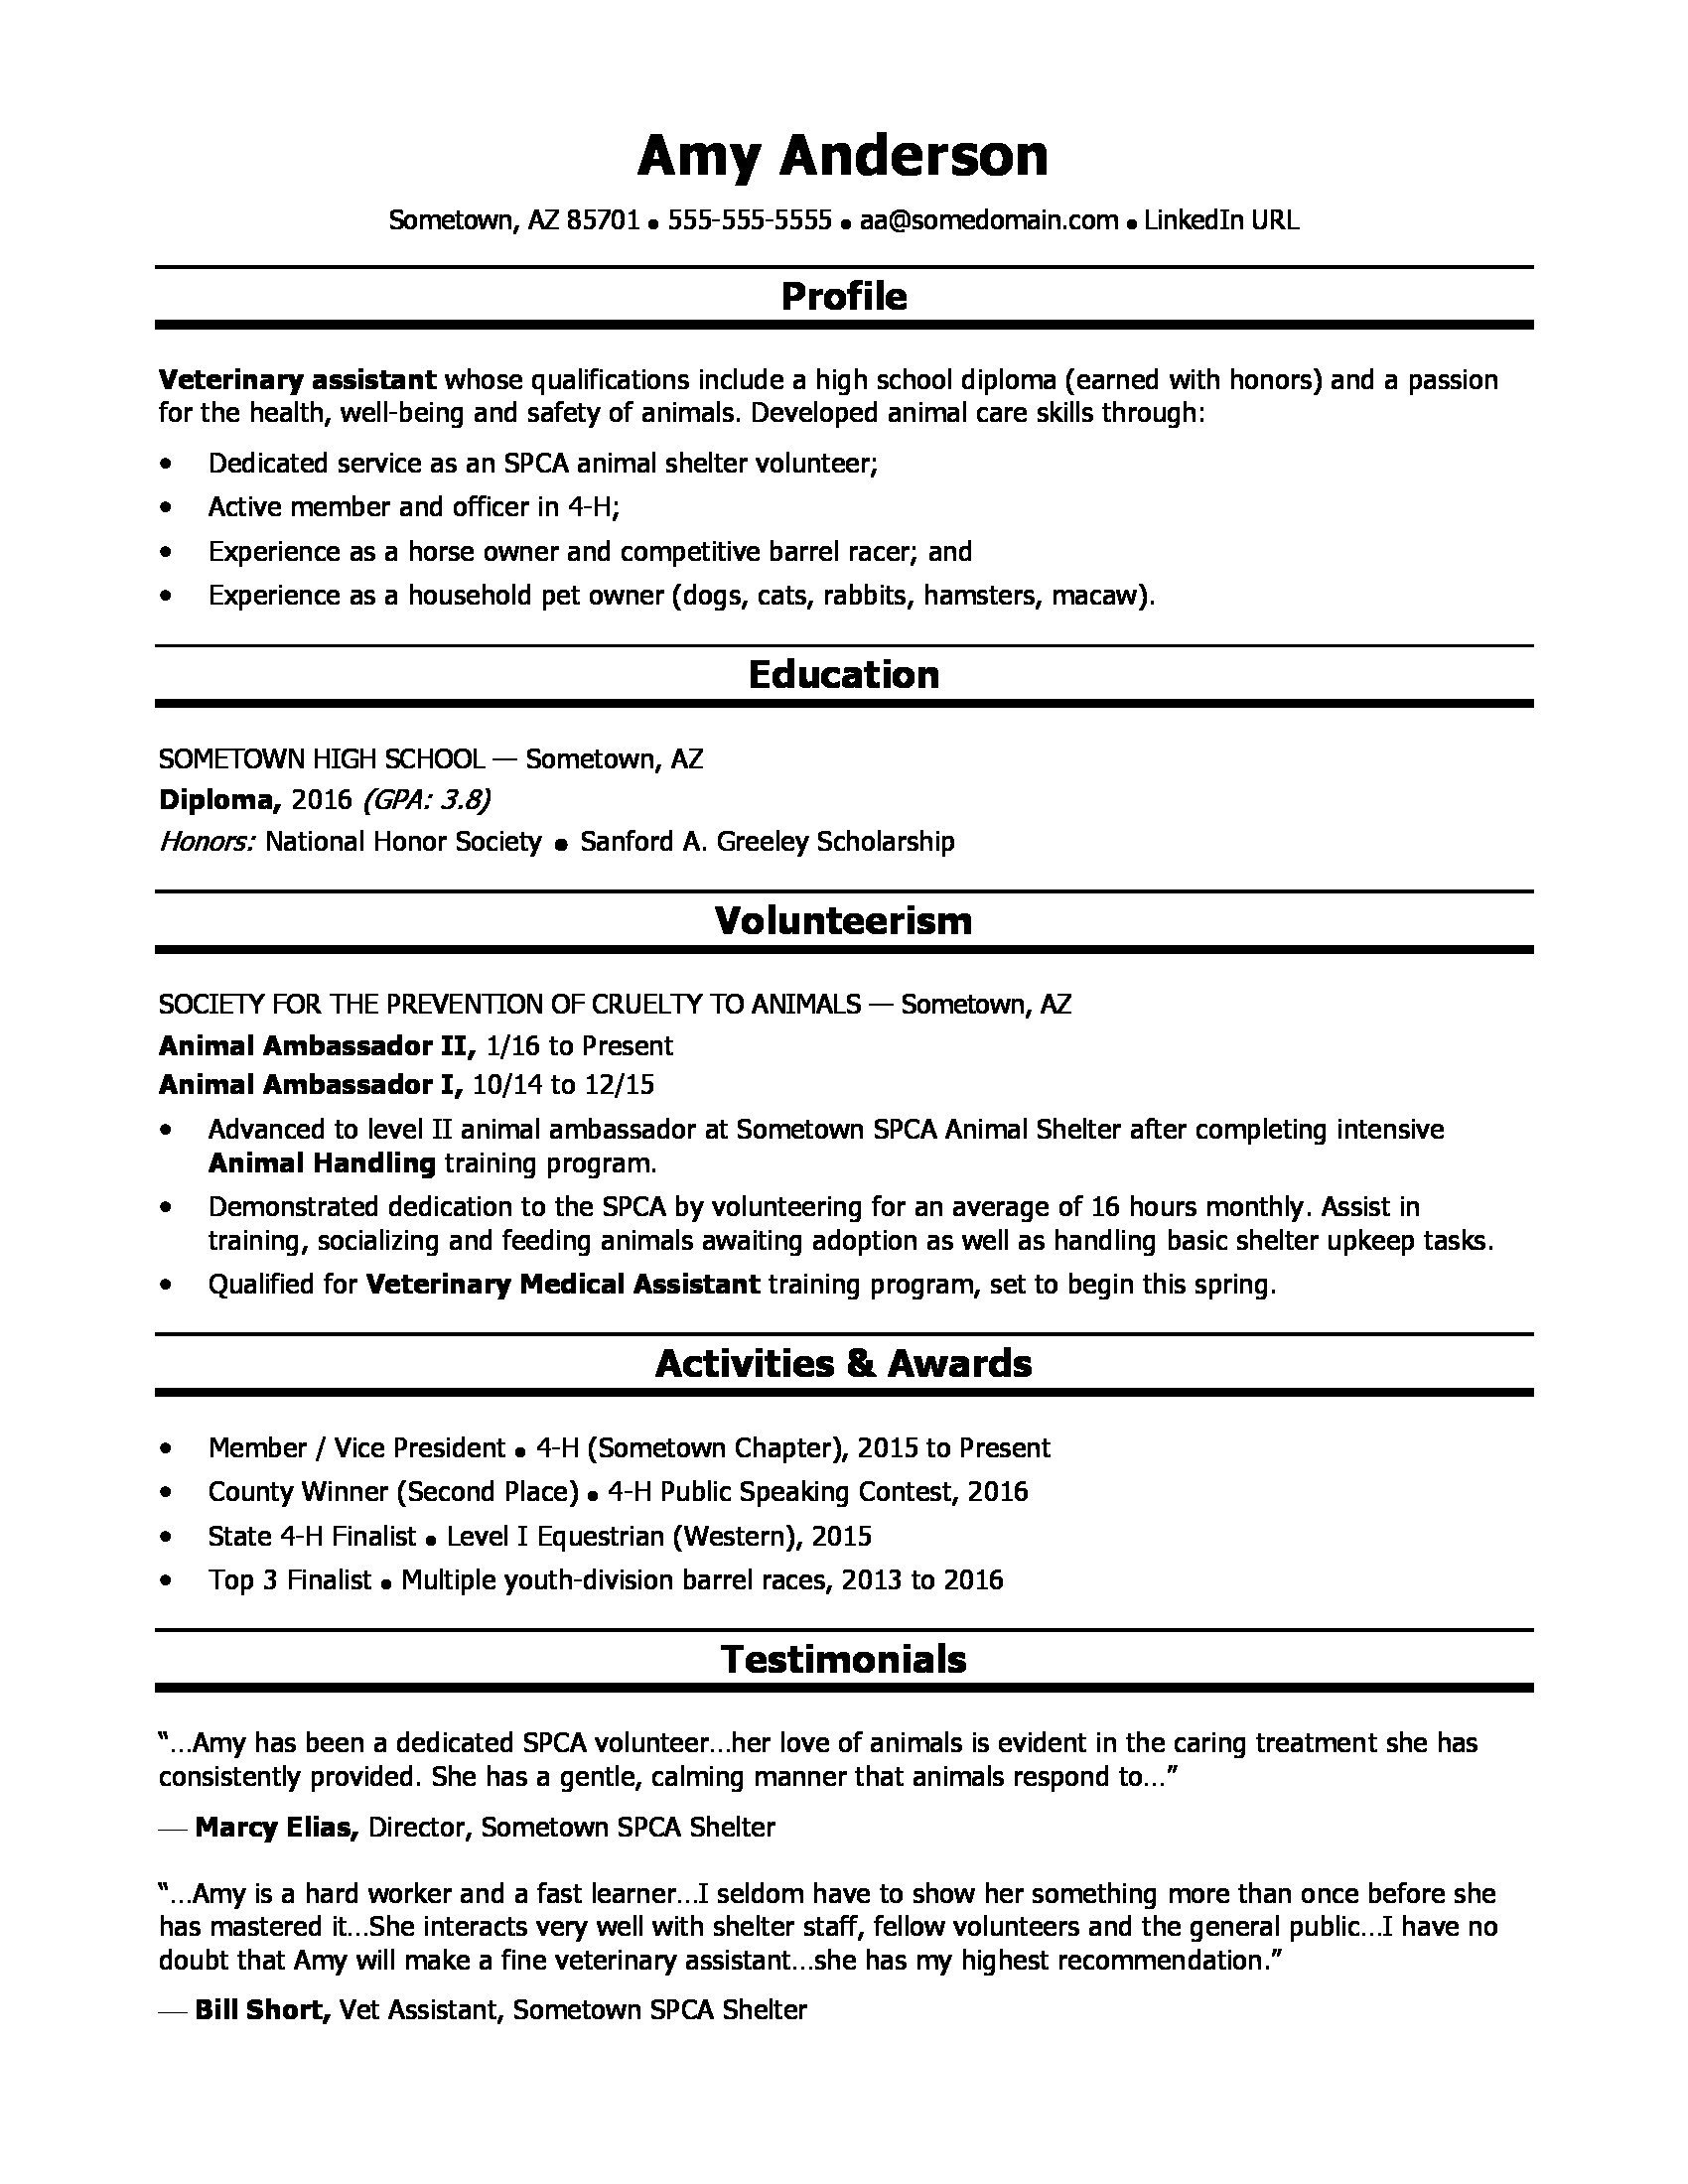 Free Resume Template for High School Graduate High School Grad Resume Sample Monster.com